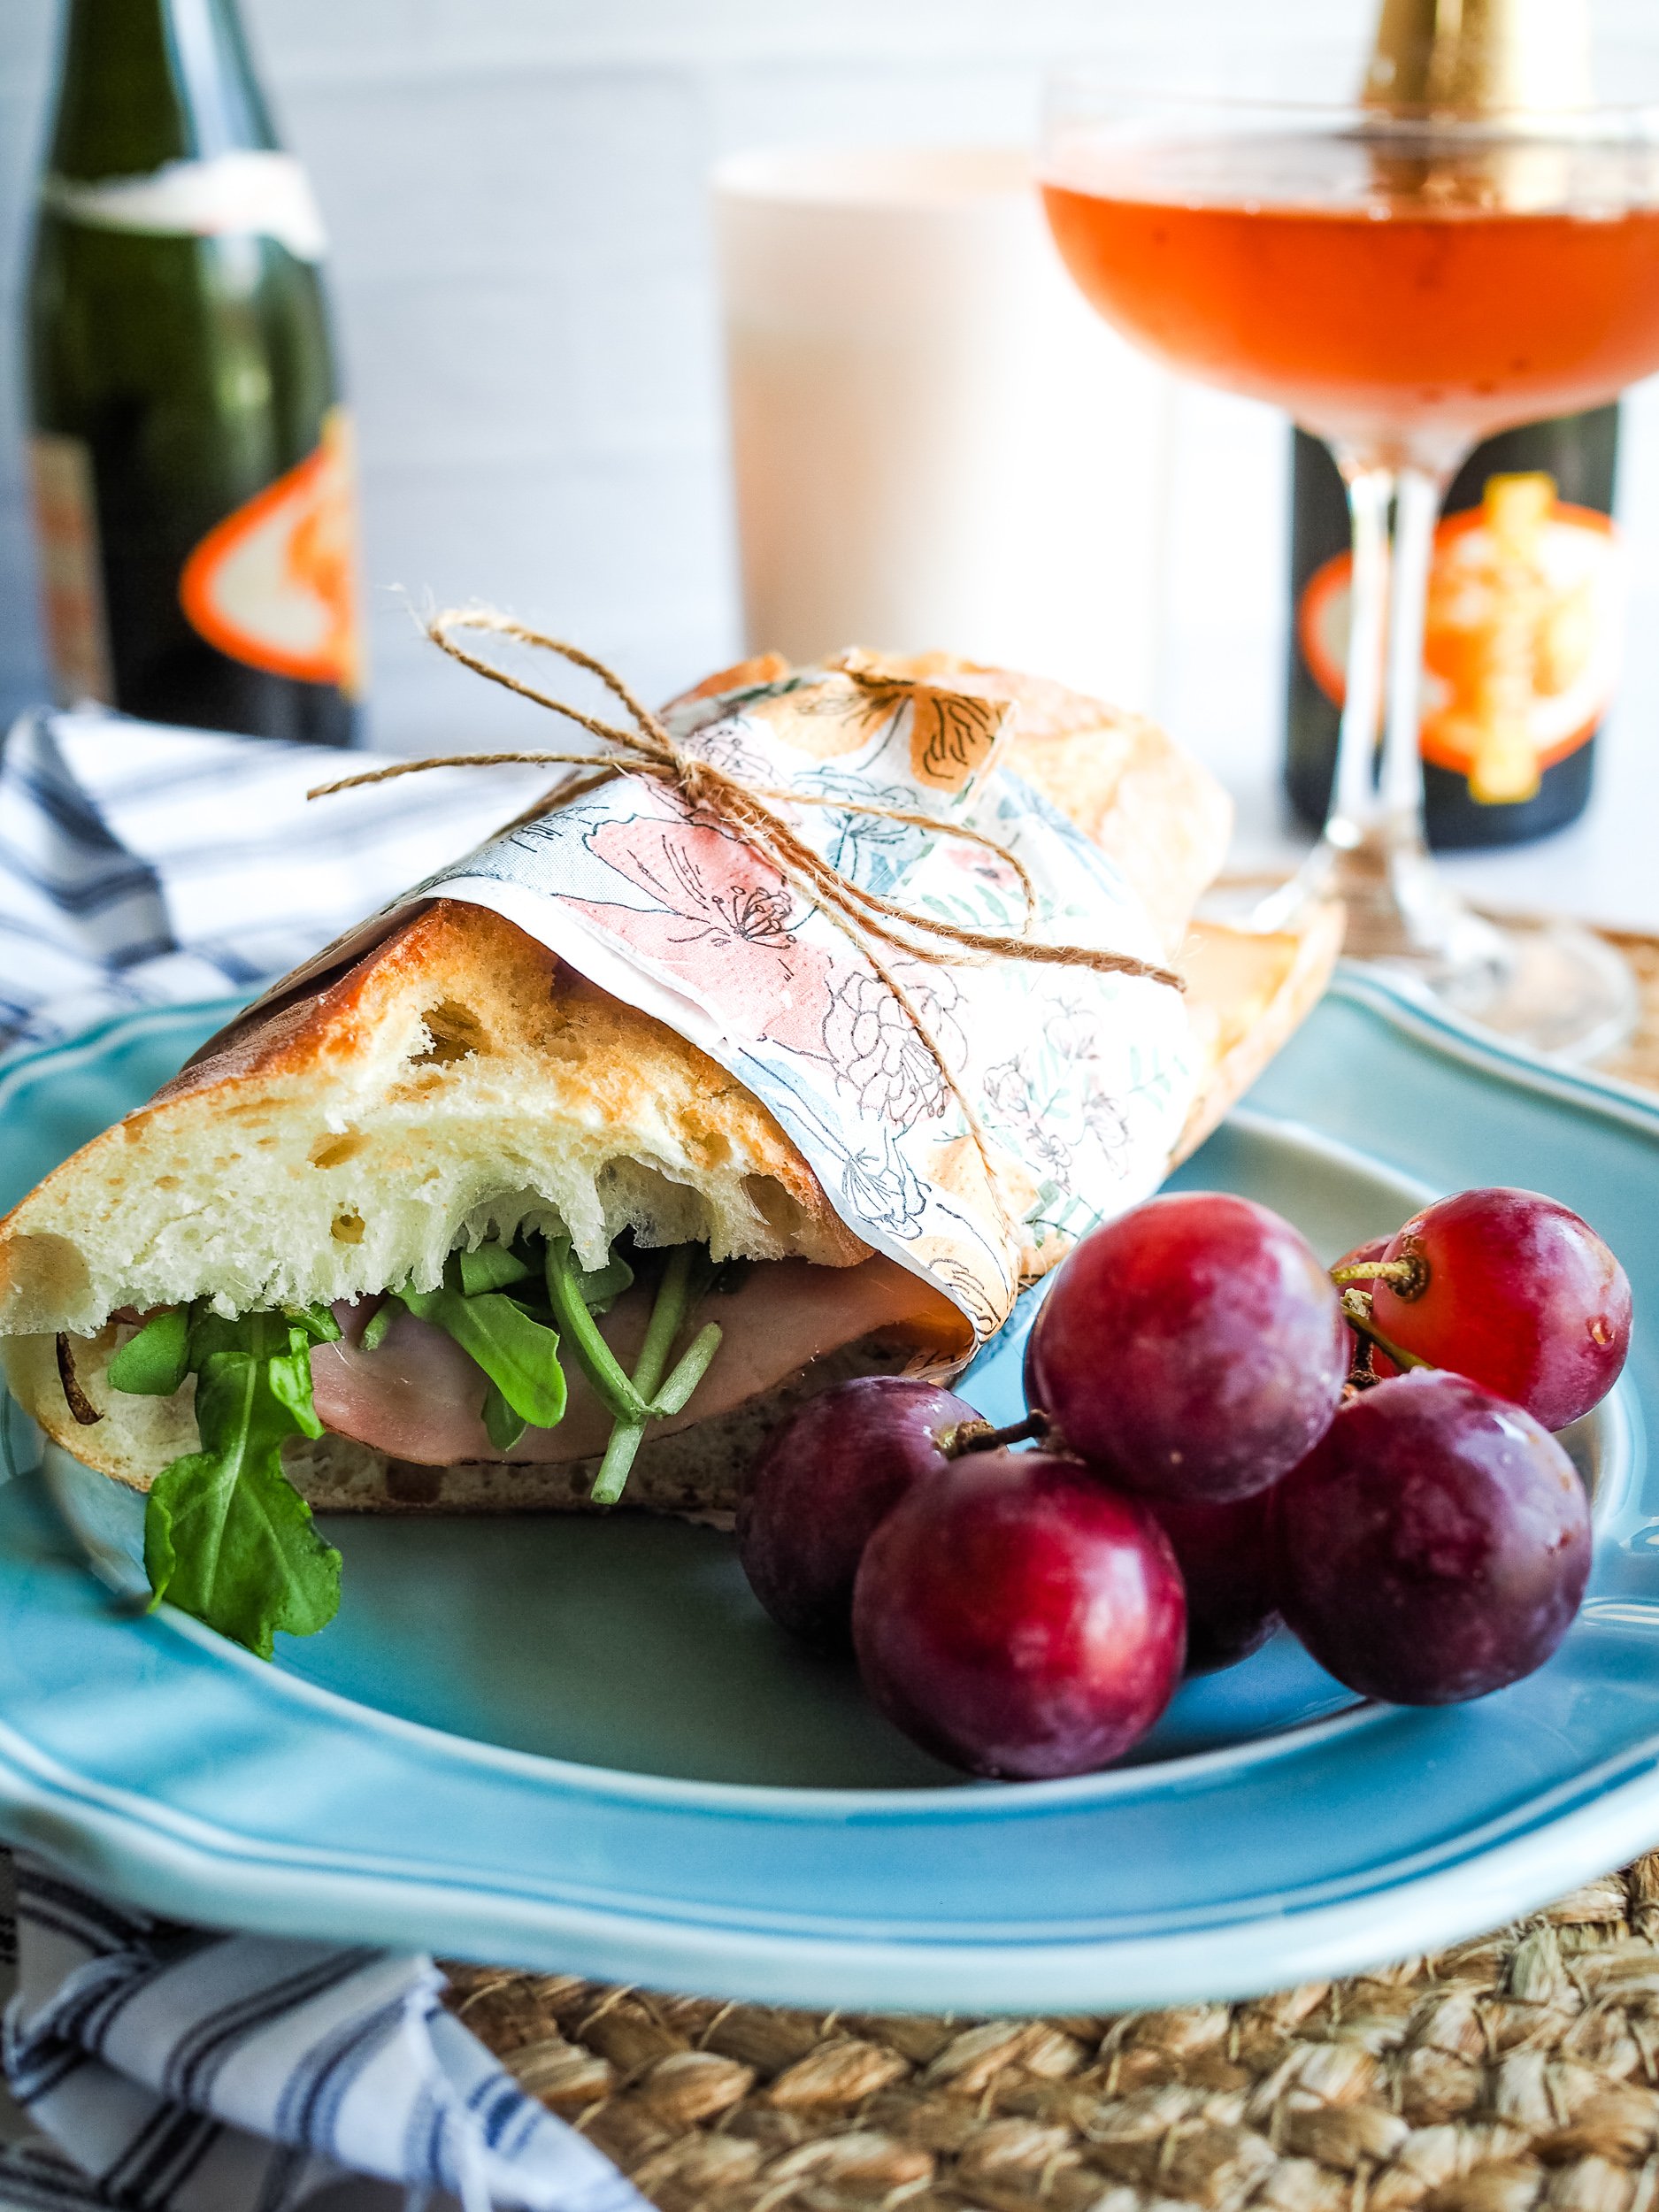 Side view of baguette sandwich filled with ham and arugula, wraped in floral napkin, tied with twine, and set onto a blue plate with grapes. There's a candle and rose champagne in the background.